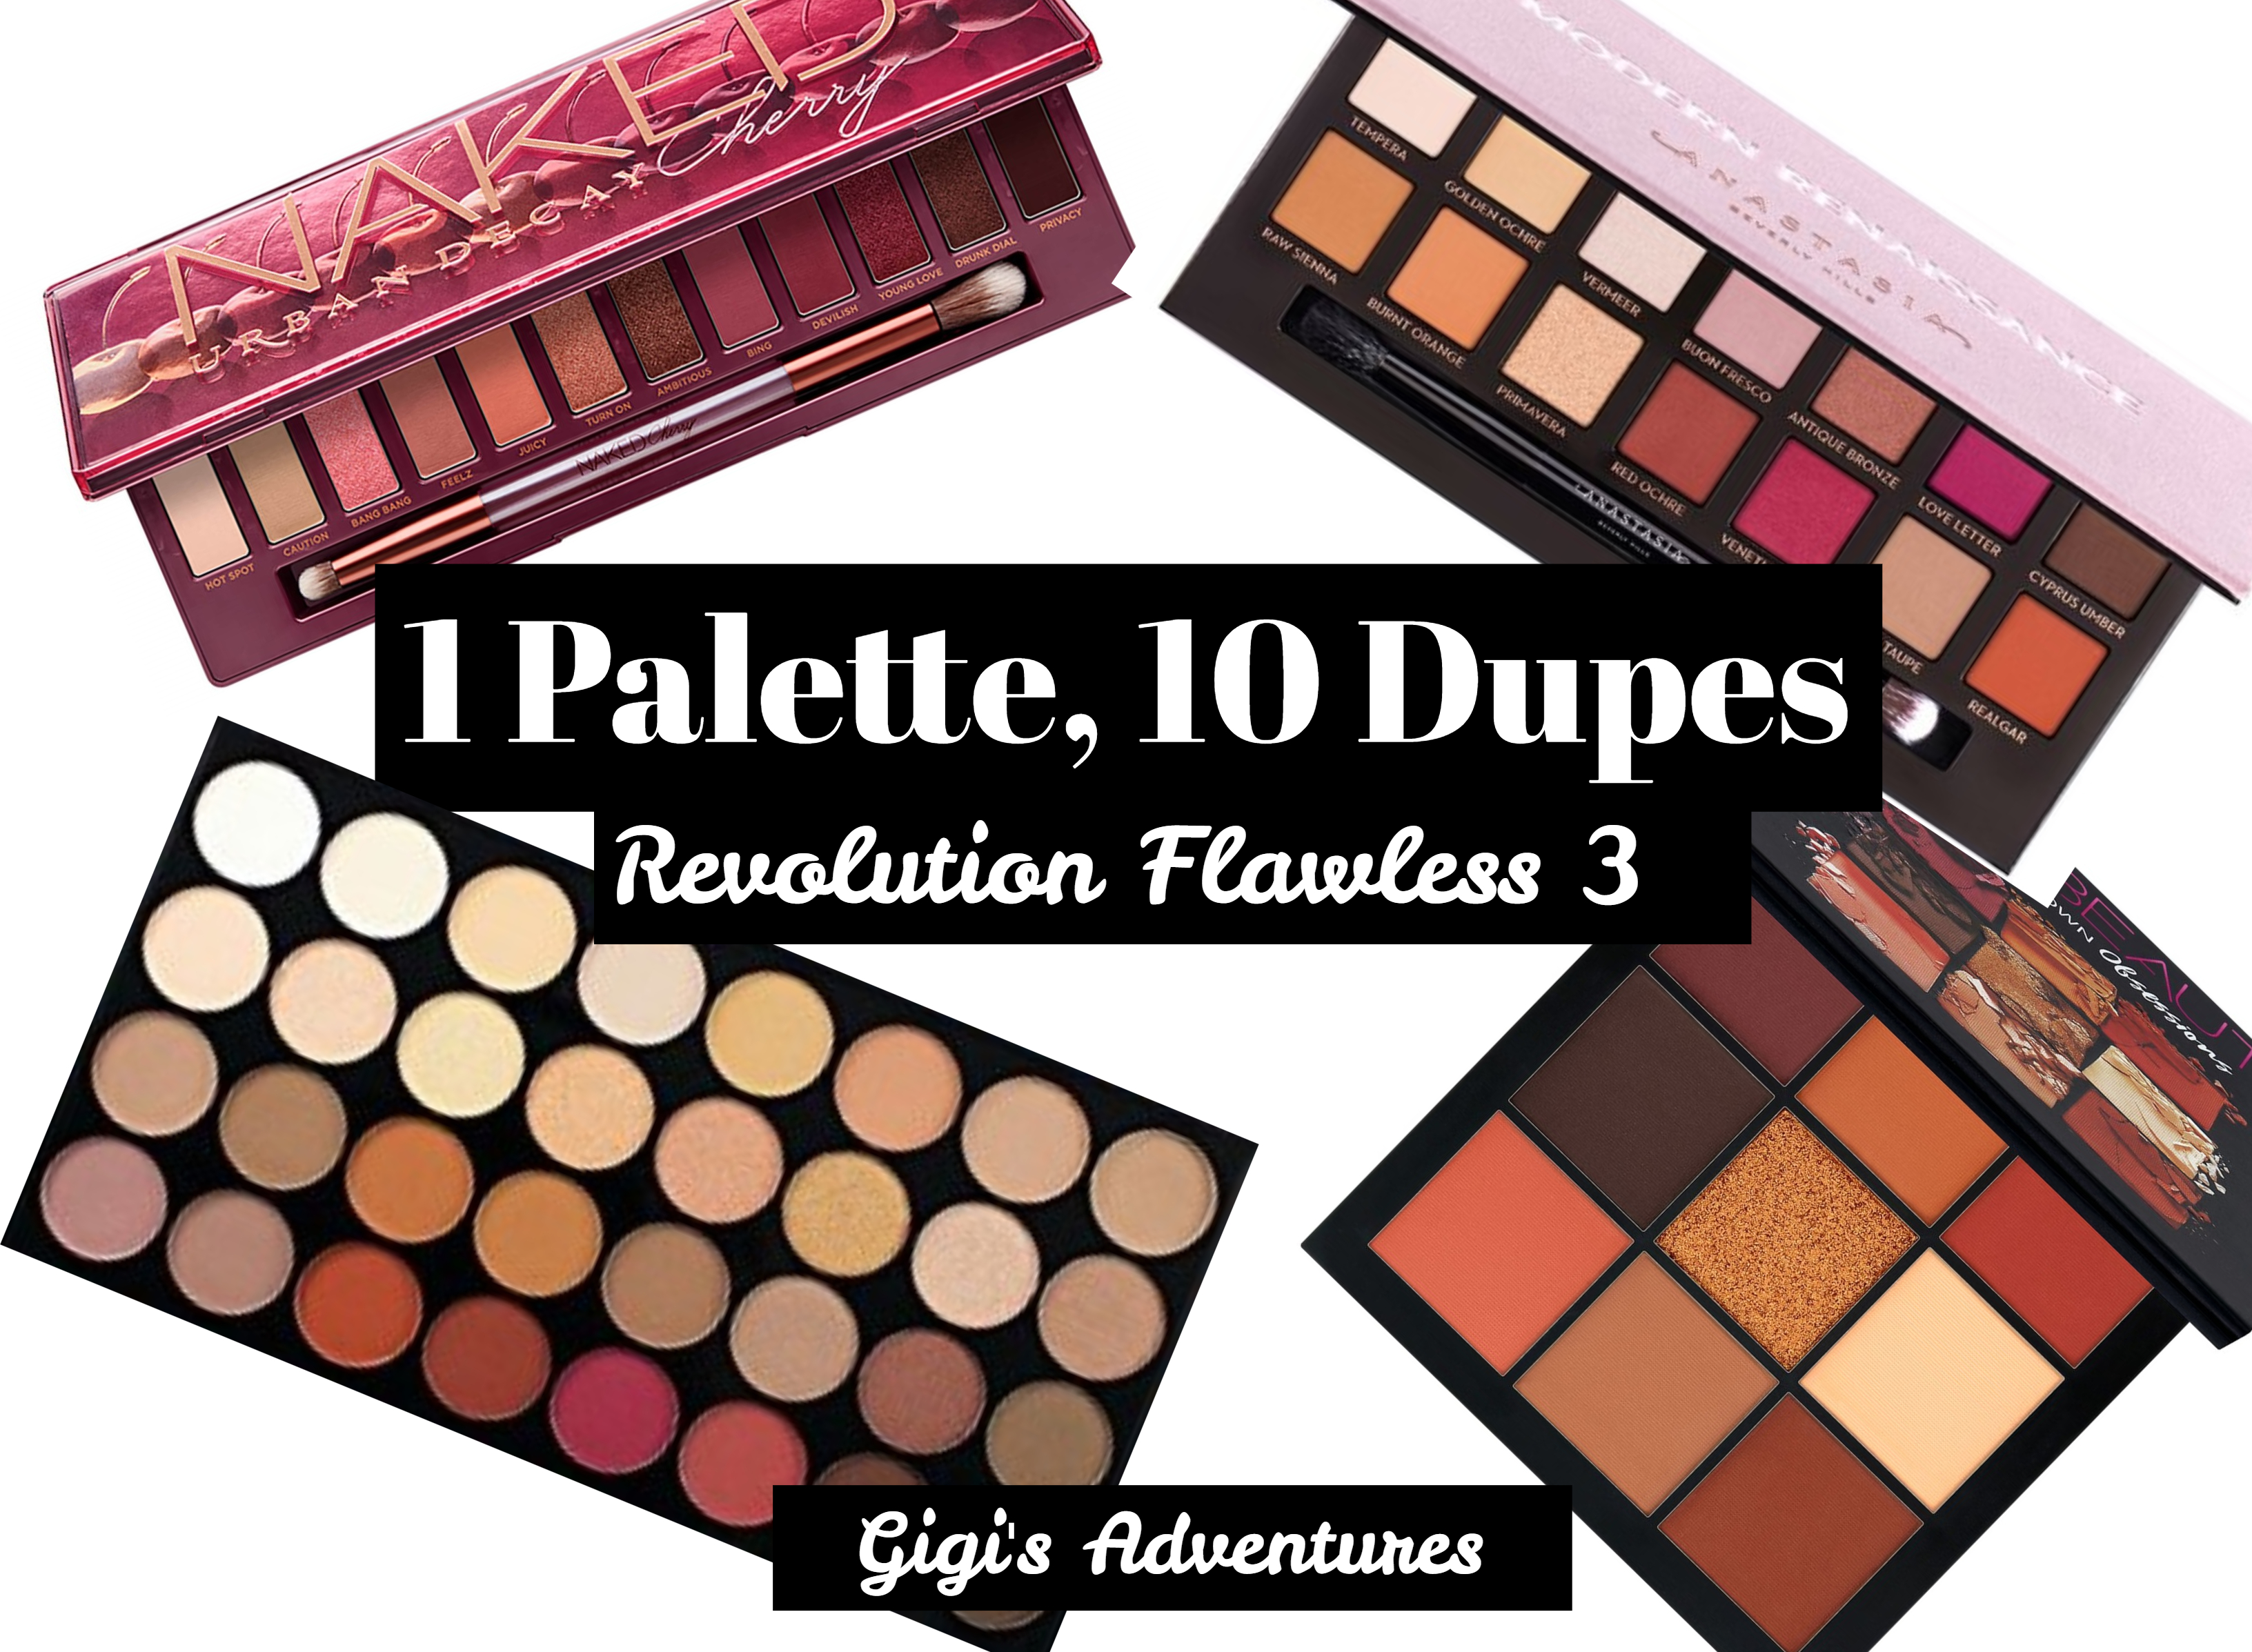 1 Palette, 10 Dupes_ Revolution Flawless 3